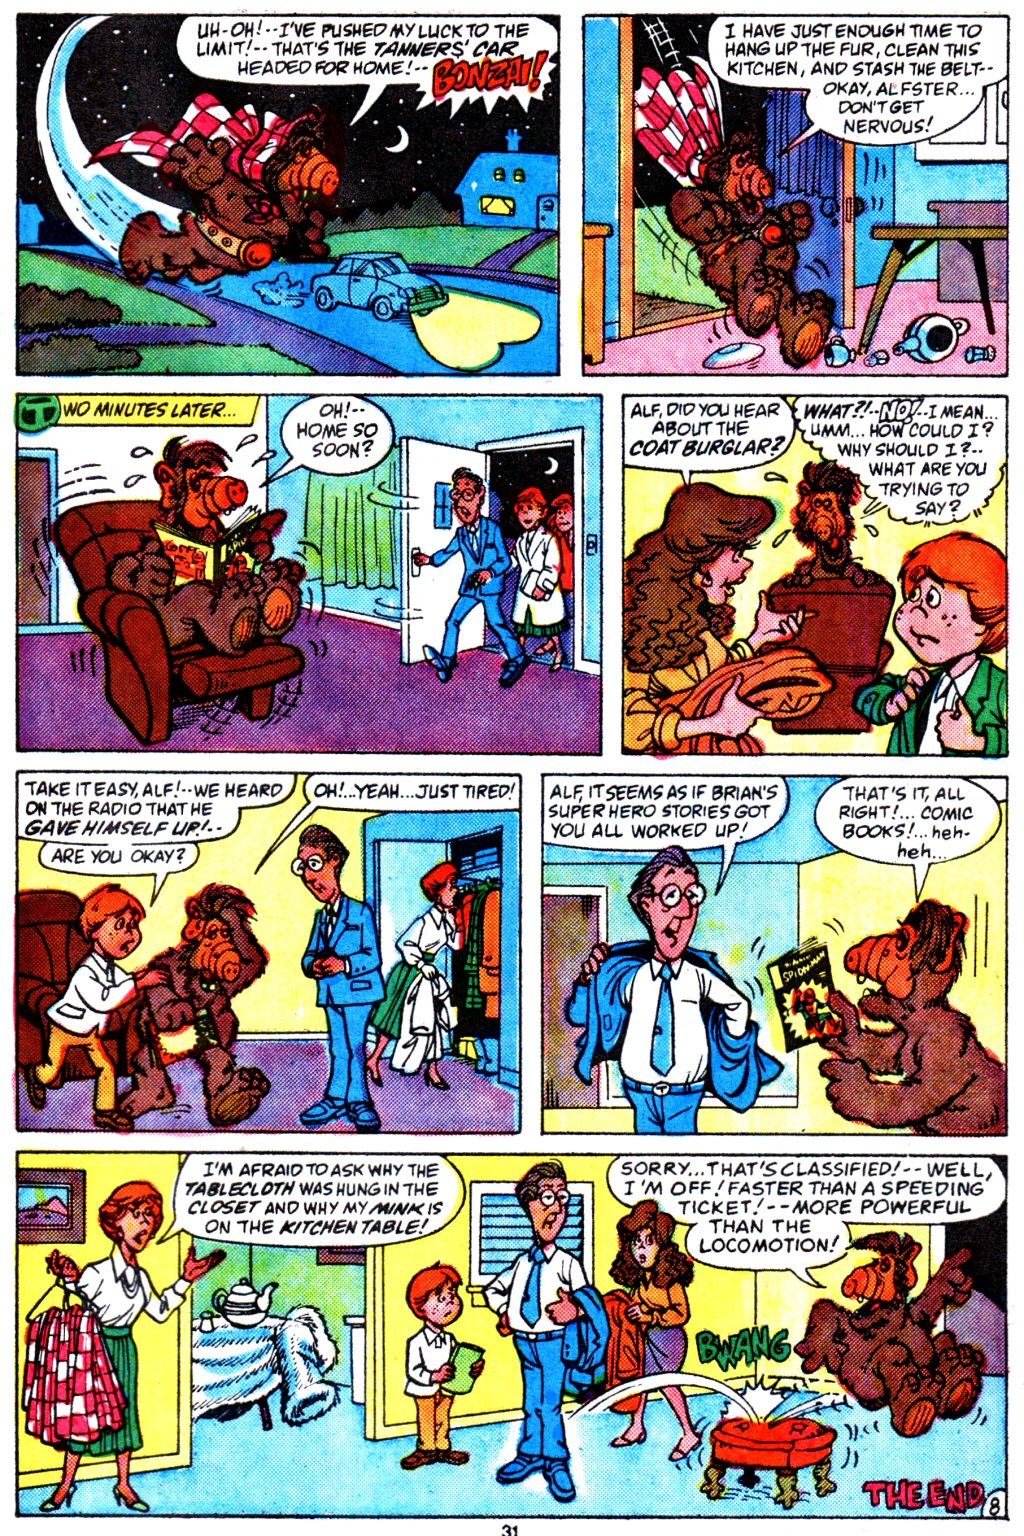 Read online ALF comic -  Issue #4 - 24